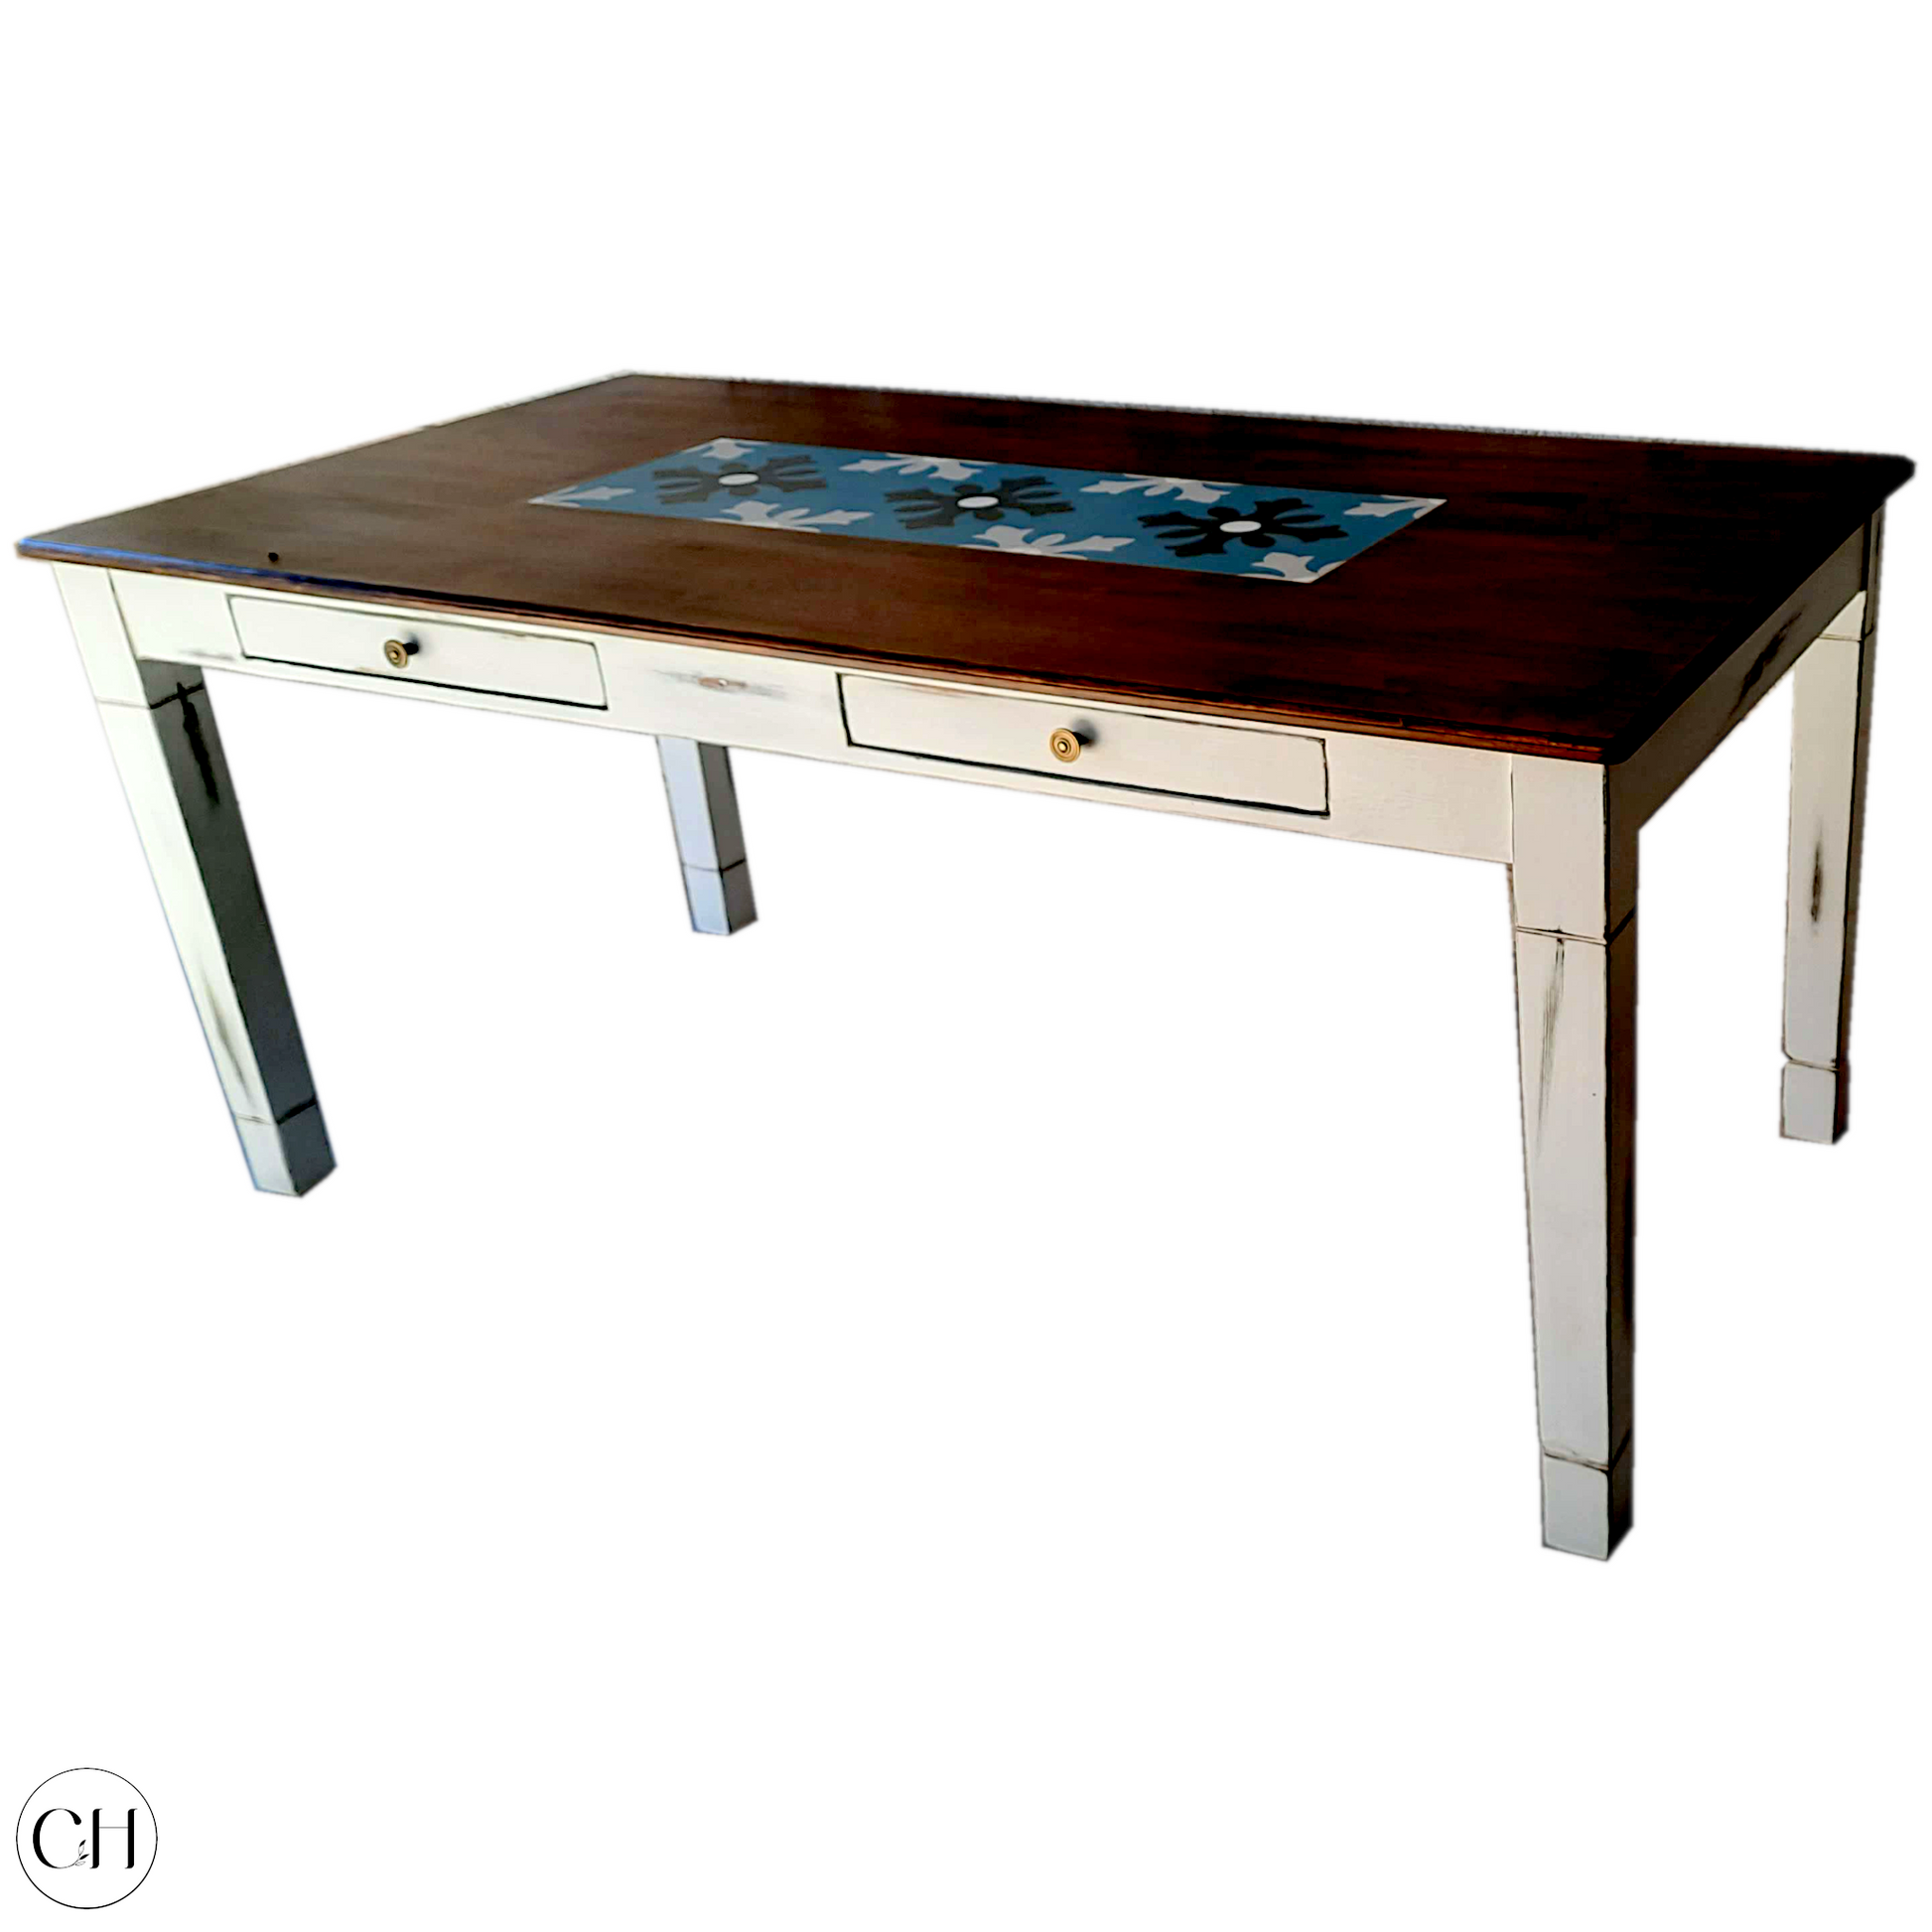 CustHum-Geranium-dining table with cutlery drawers on table apron and embedded tiles on top, white and wood finish